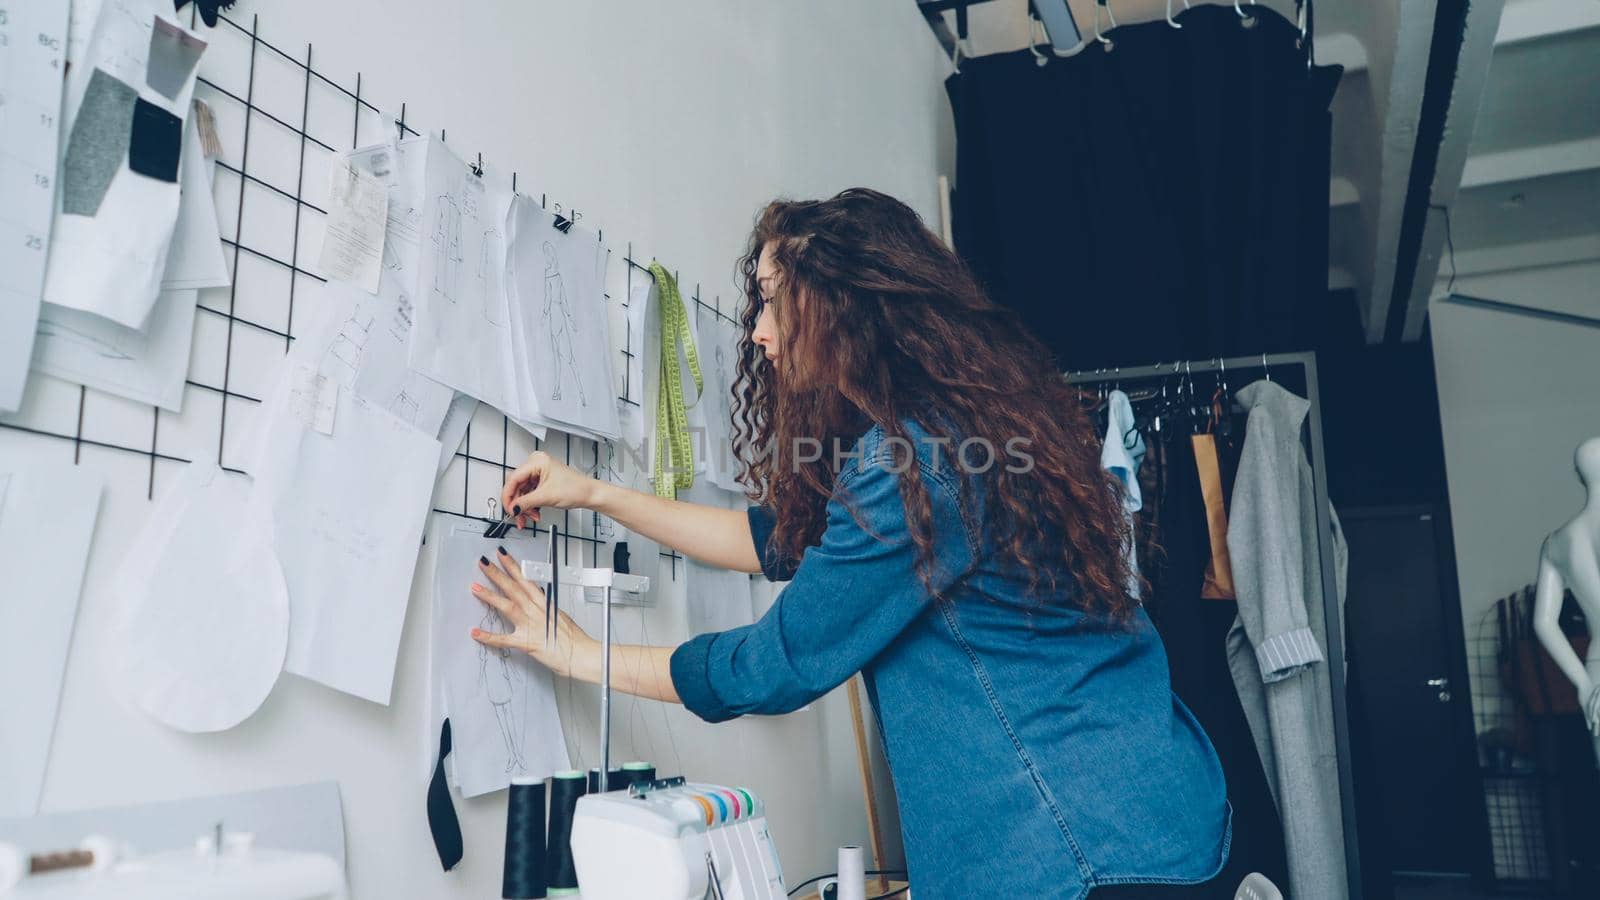 Low angle view of young attractive fashion designer looking at sketches and hanging drawings on wall in modern loft style studio. Large collection of illustration above tailoring desk.